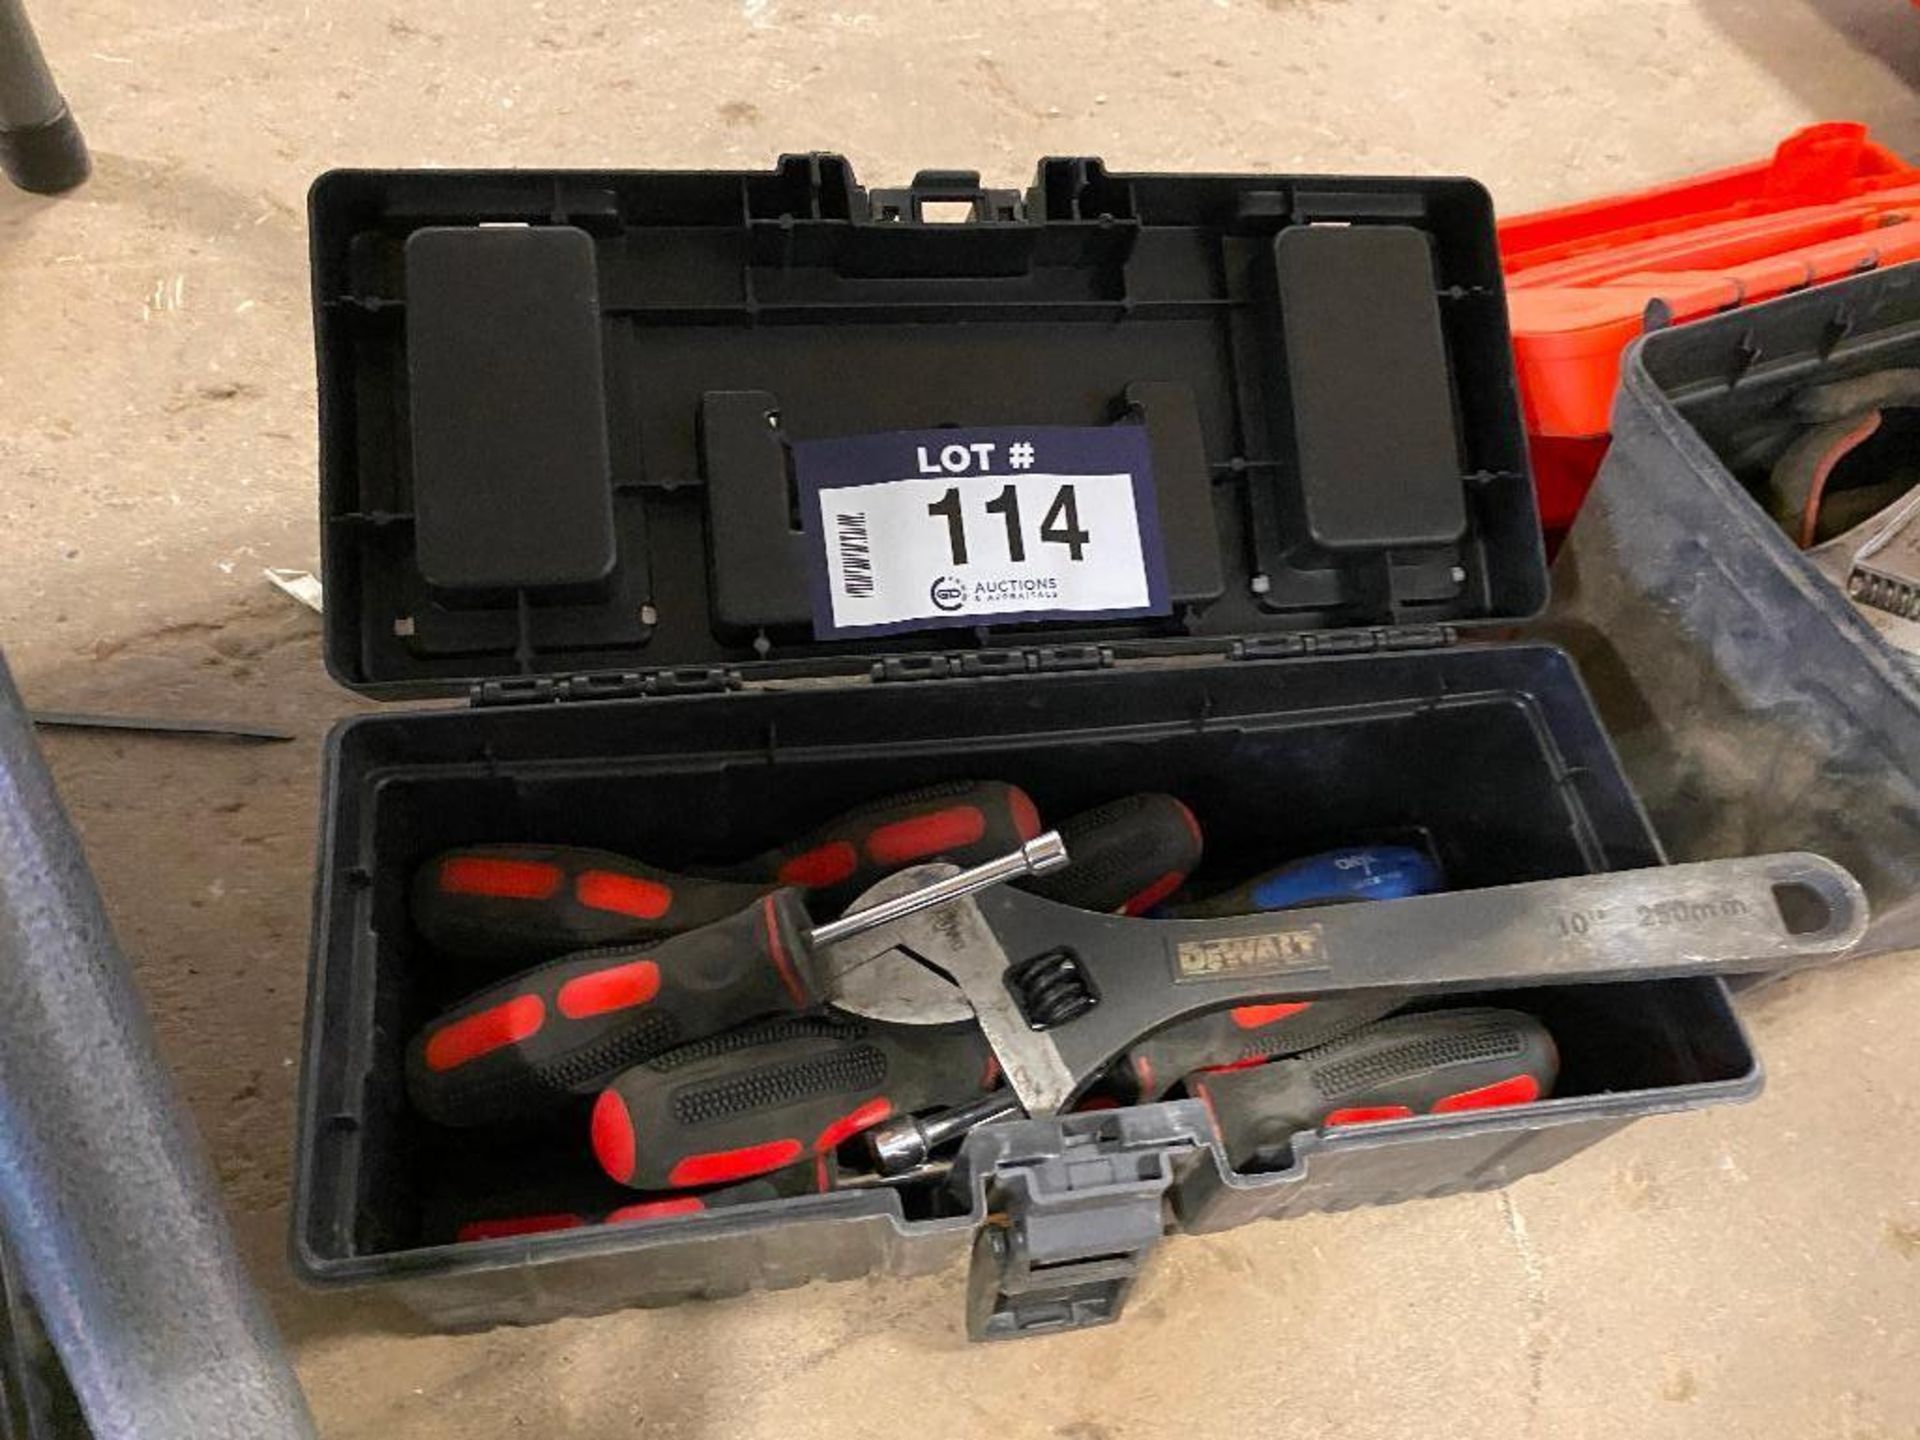 Tool Box w/ Asst. Tools including Crescent Wrench, Hex Screwdrivers, etc.